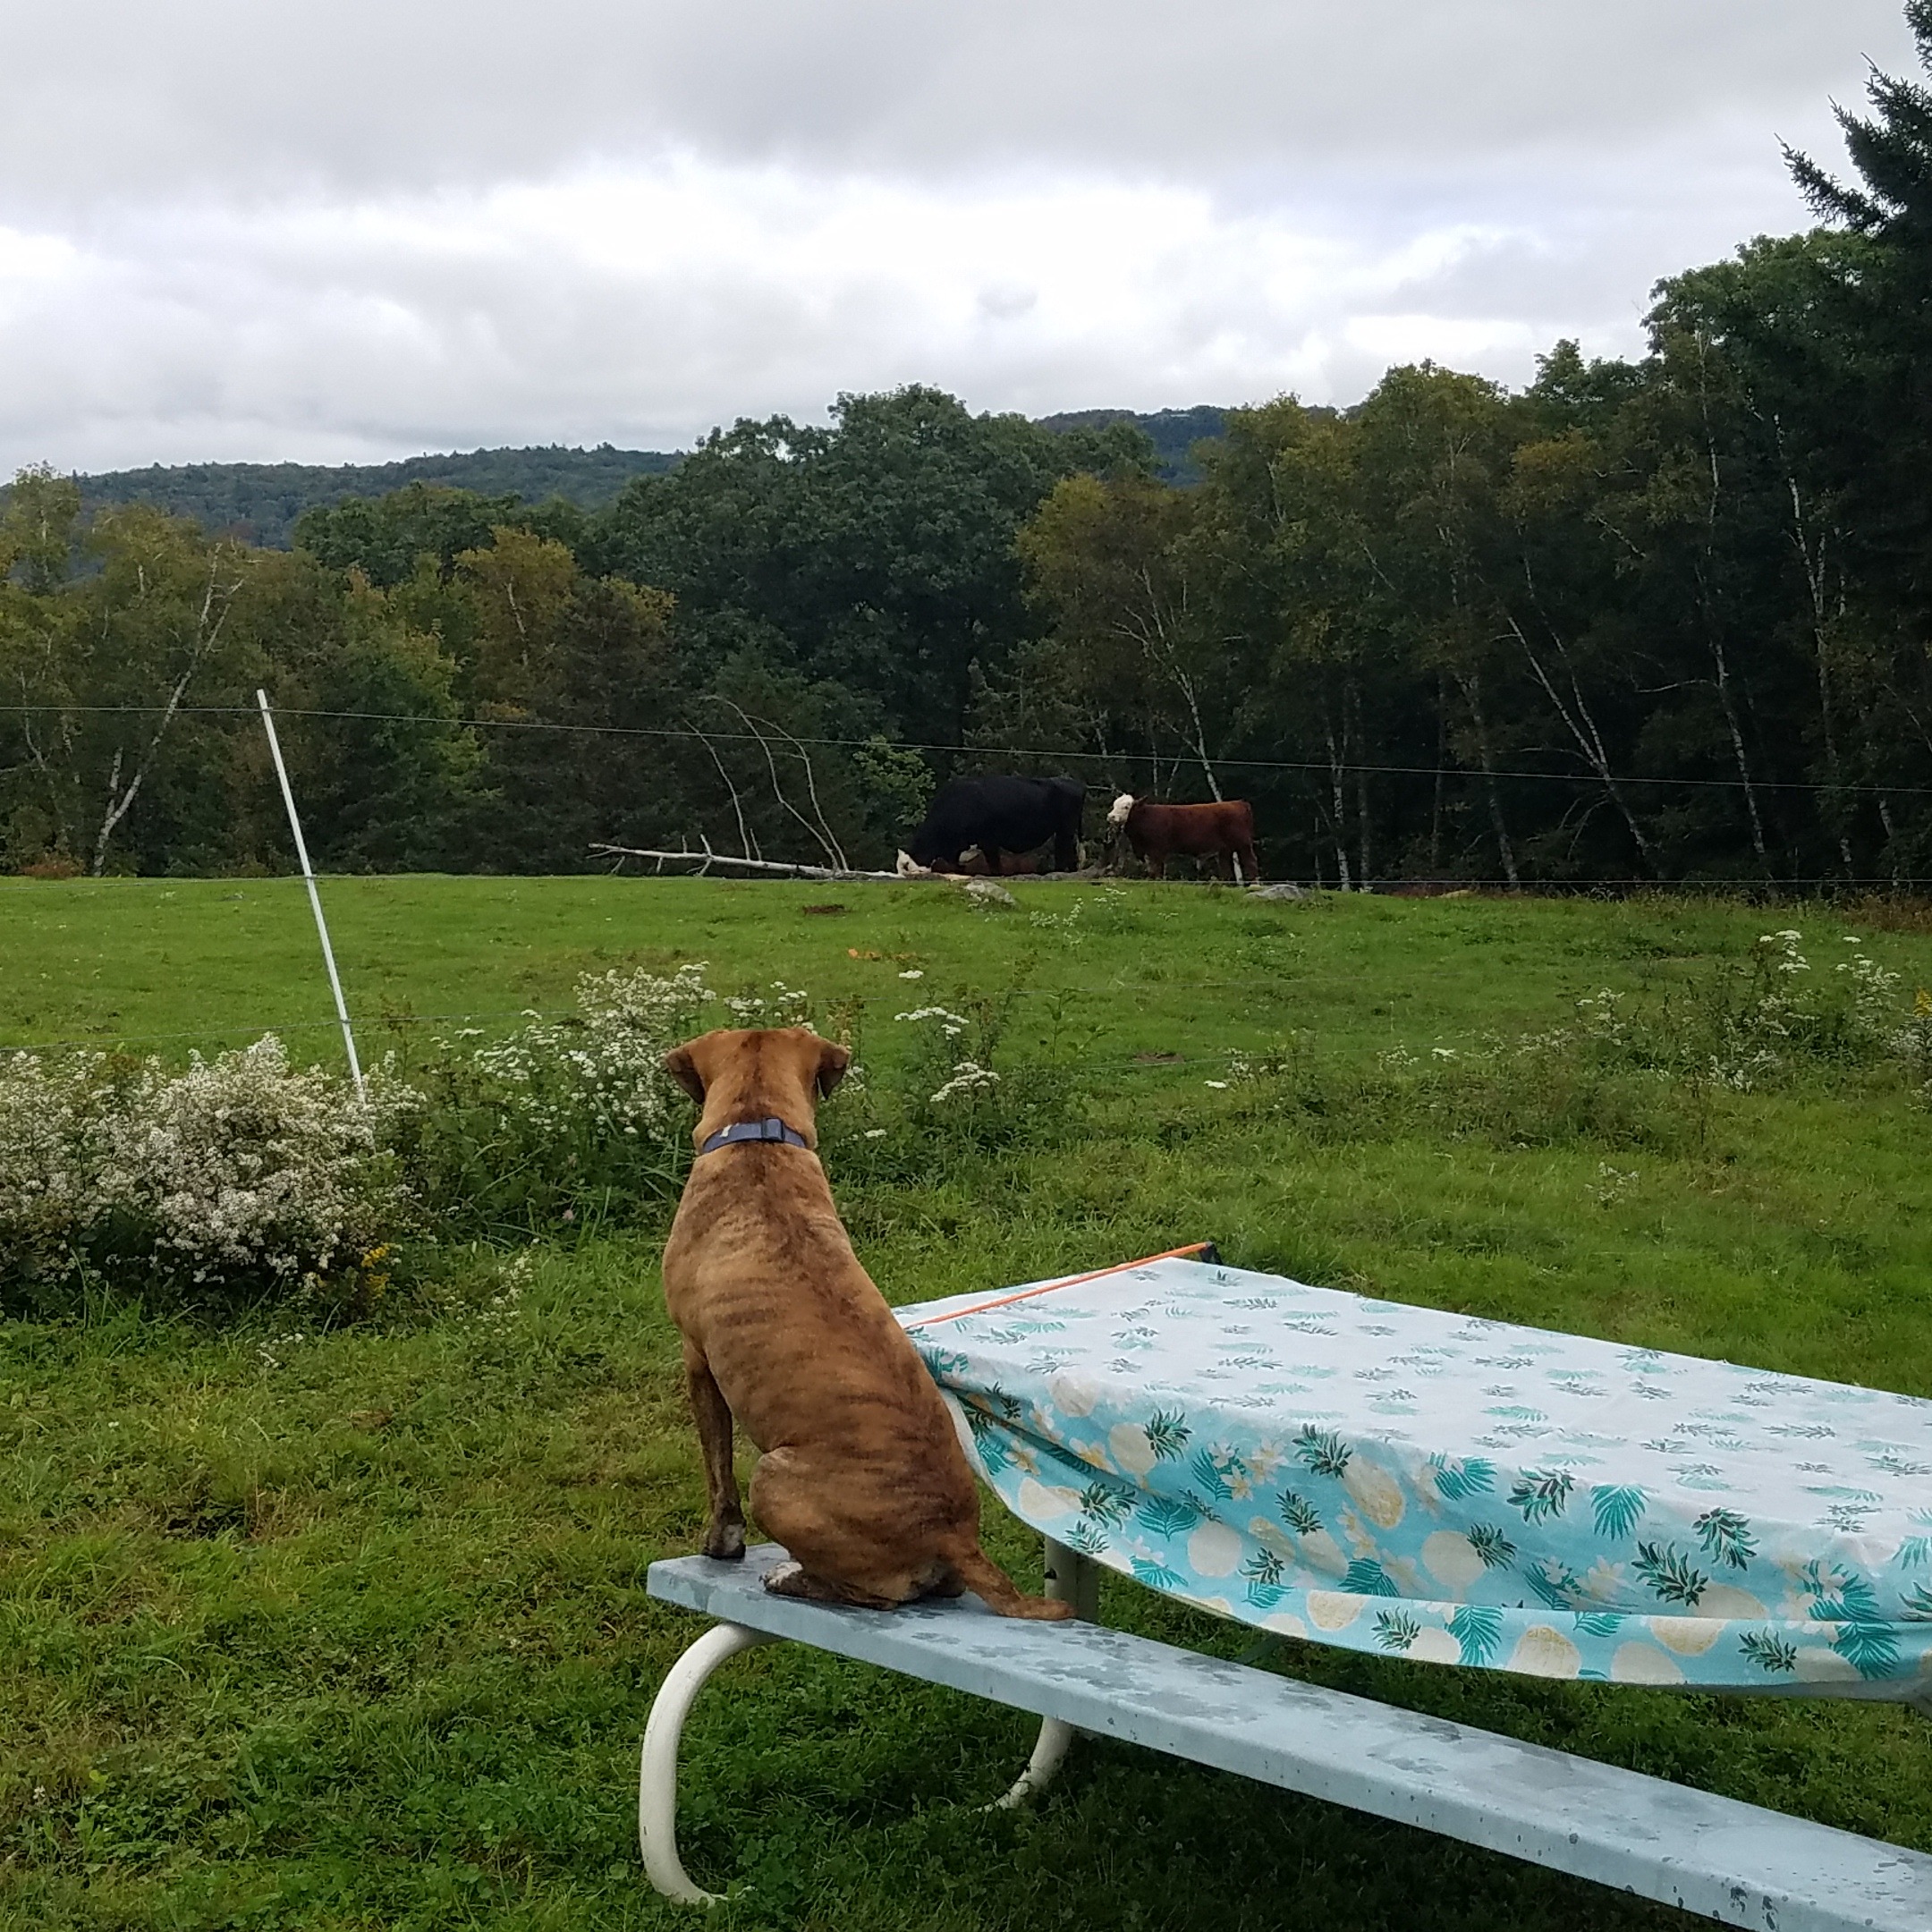 Dog sitting on a picnic table looking at the cows in the pasture